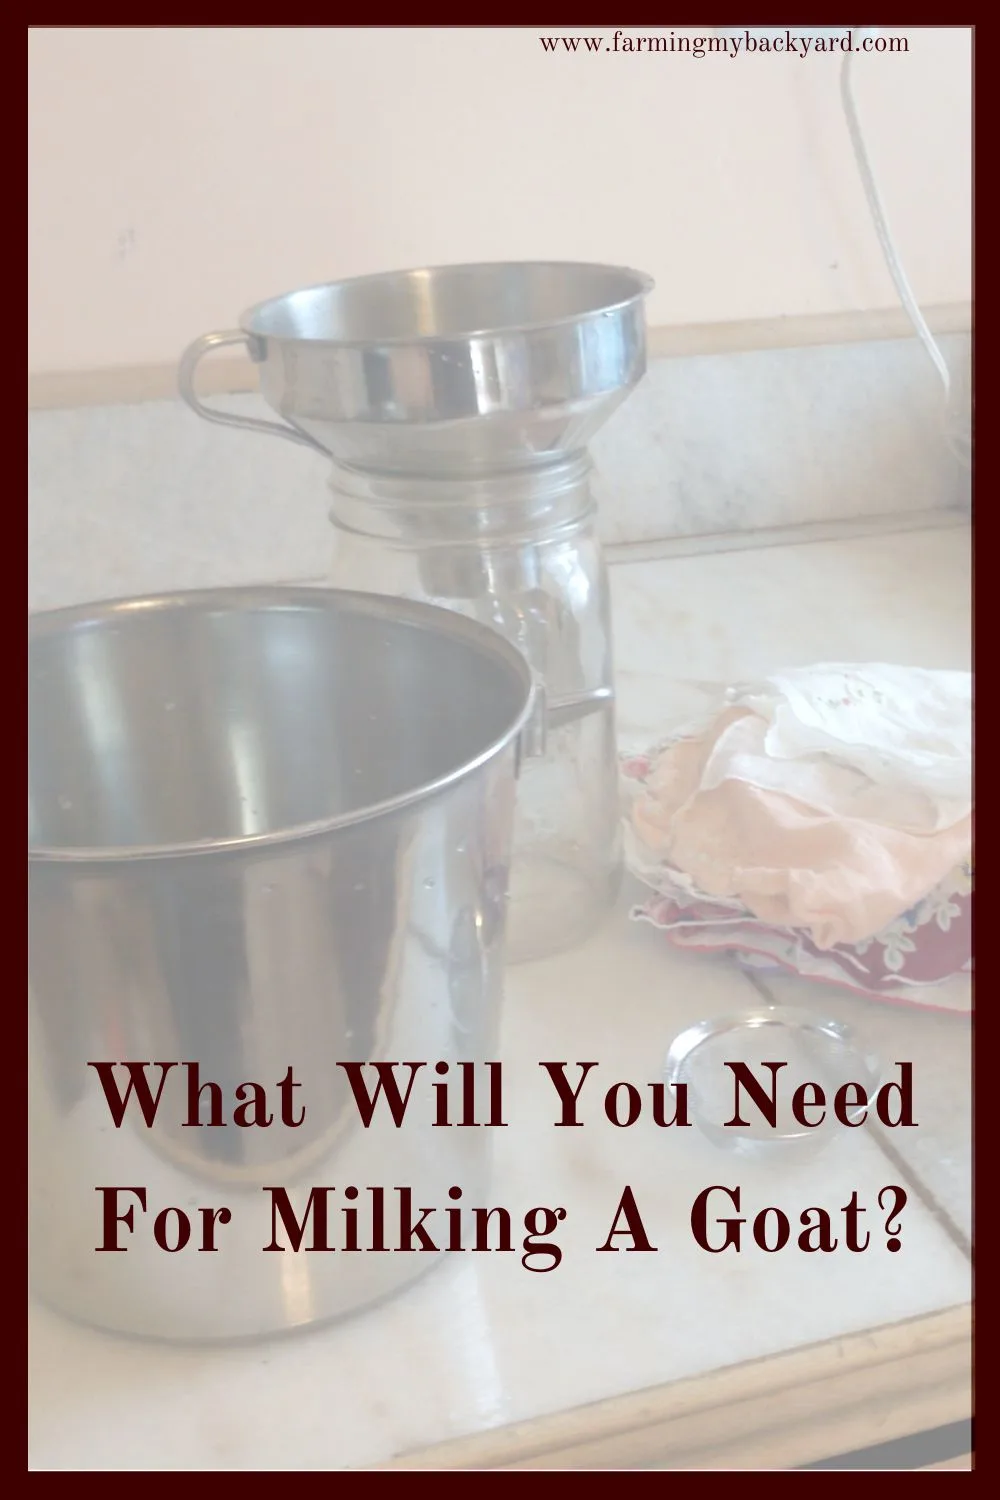 What equipment will you need before you start milking your diary goats? Make sure you know before milking a goat!